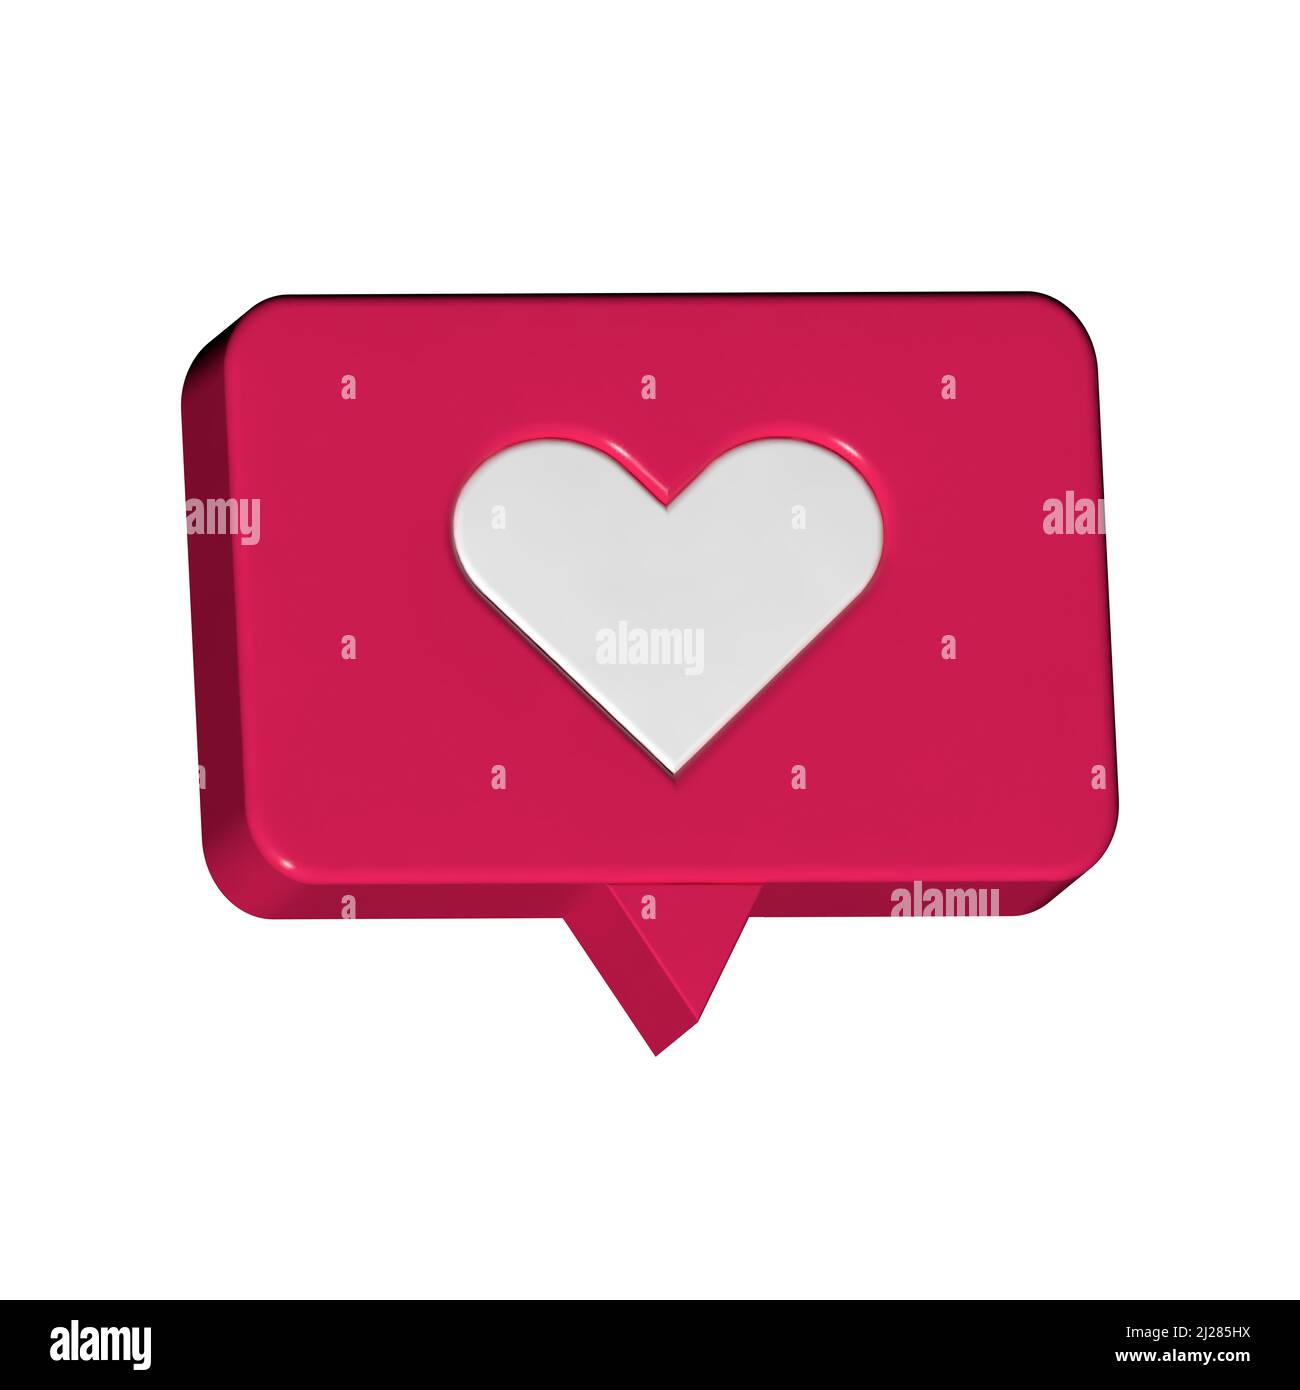 Social media notification icon. Like icon on a red background. 3d design. Stock Photo